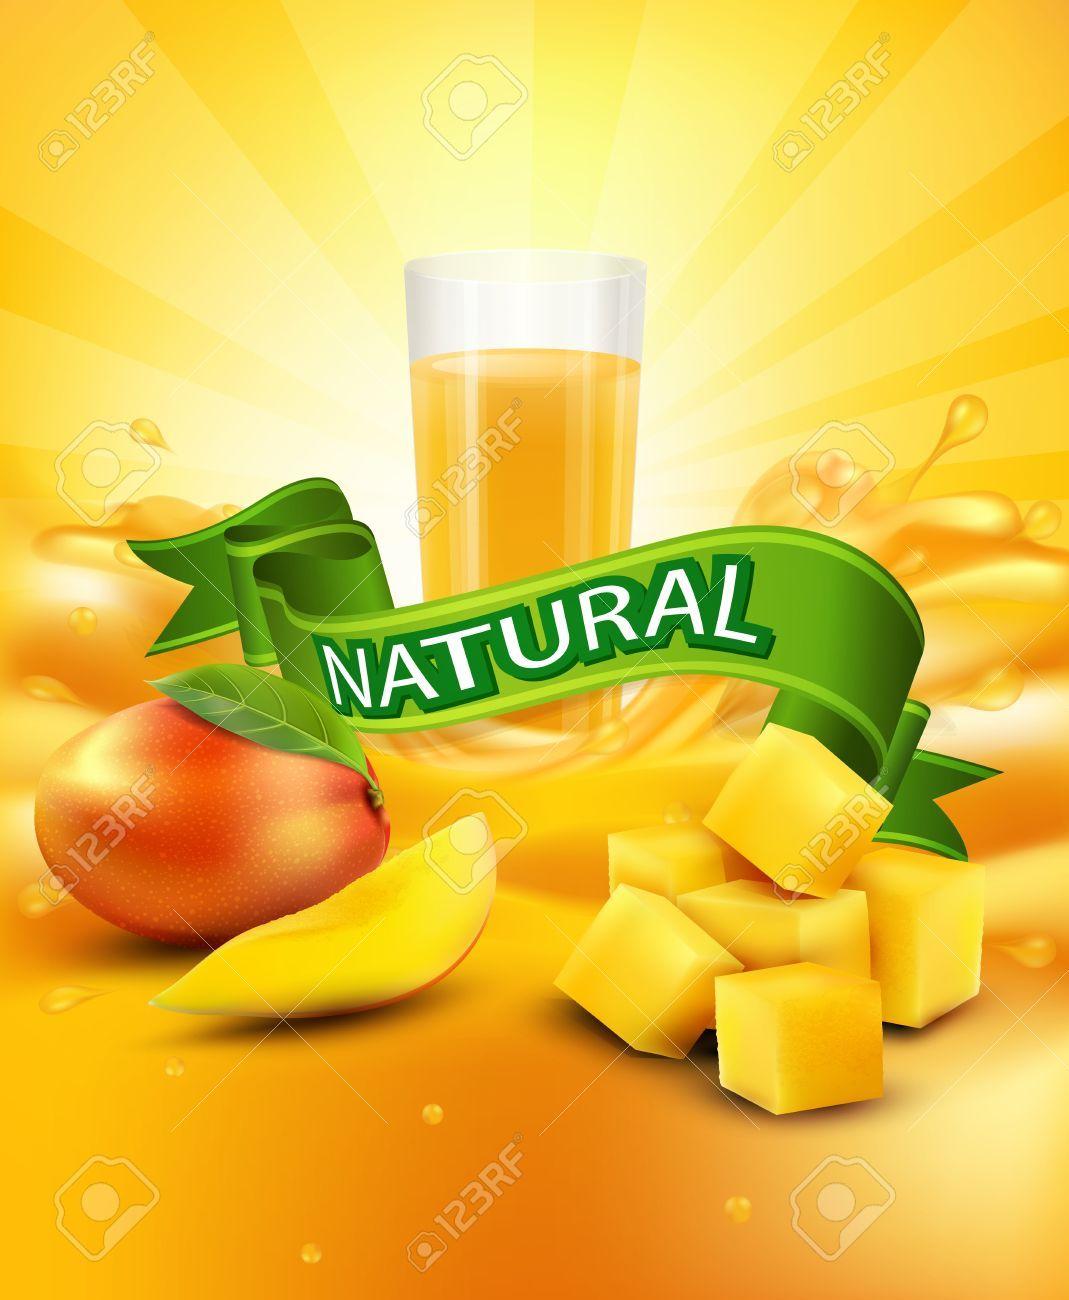 vector background with mango, a glass of juice, slices of mango